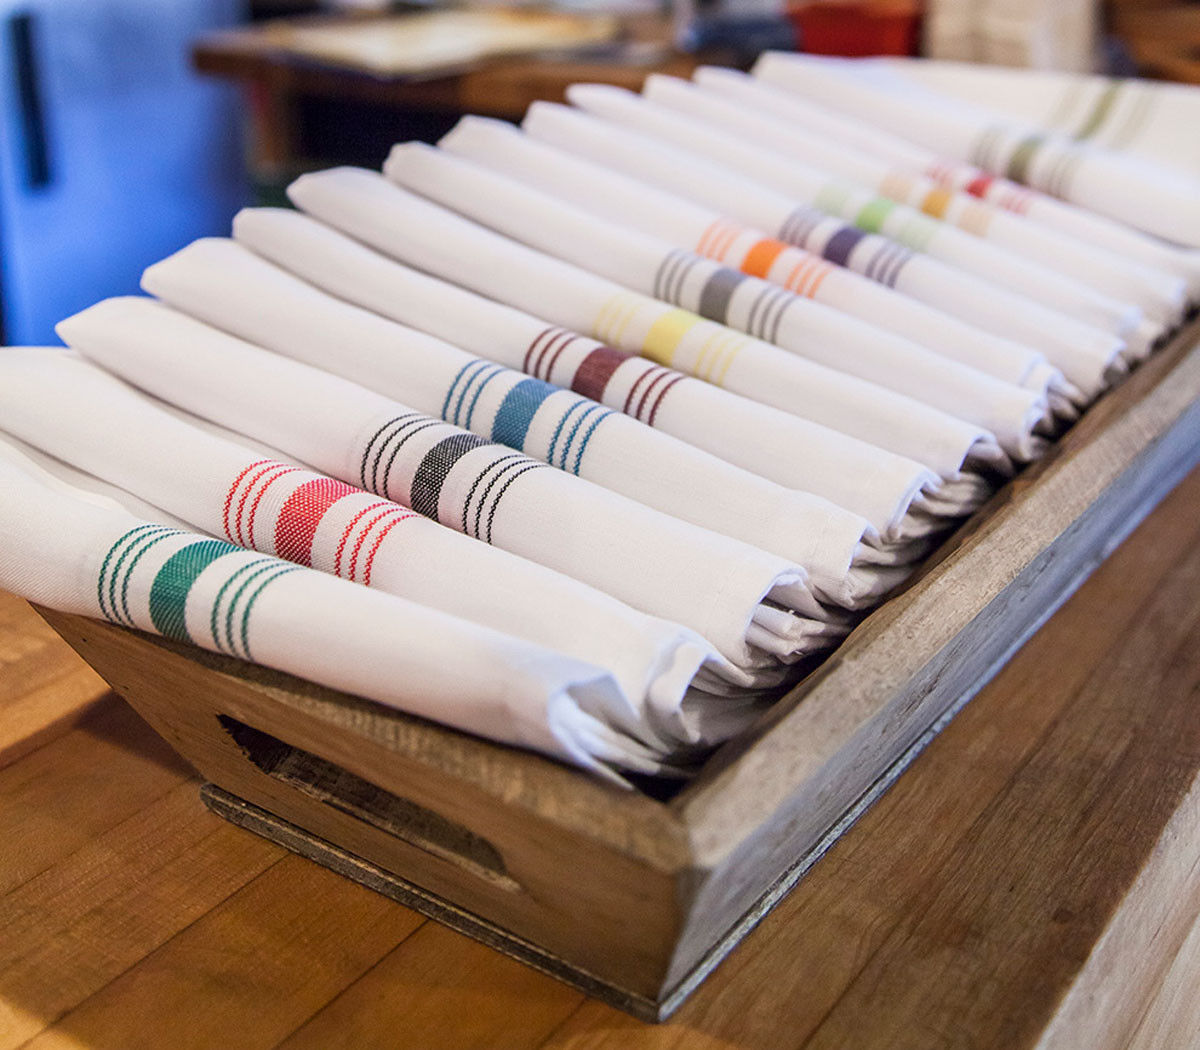 What experience do bistro napkins from Milliken Signature Stripe offer diners?